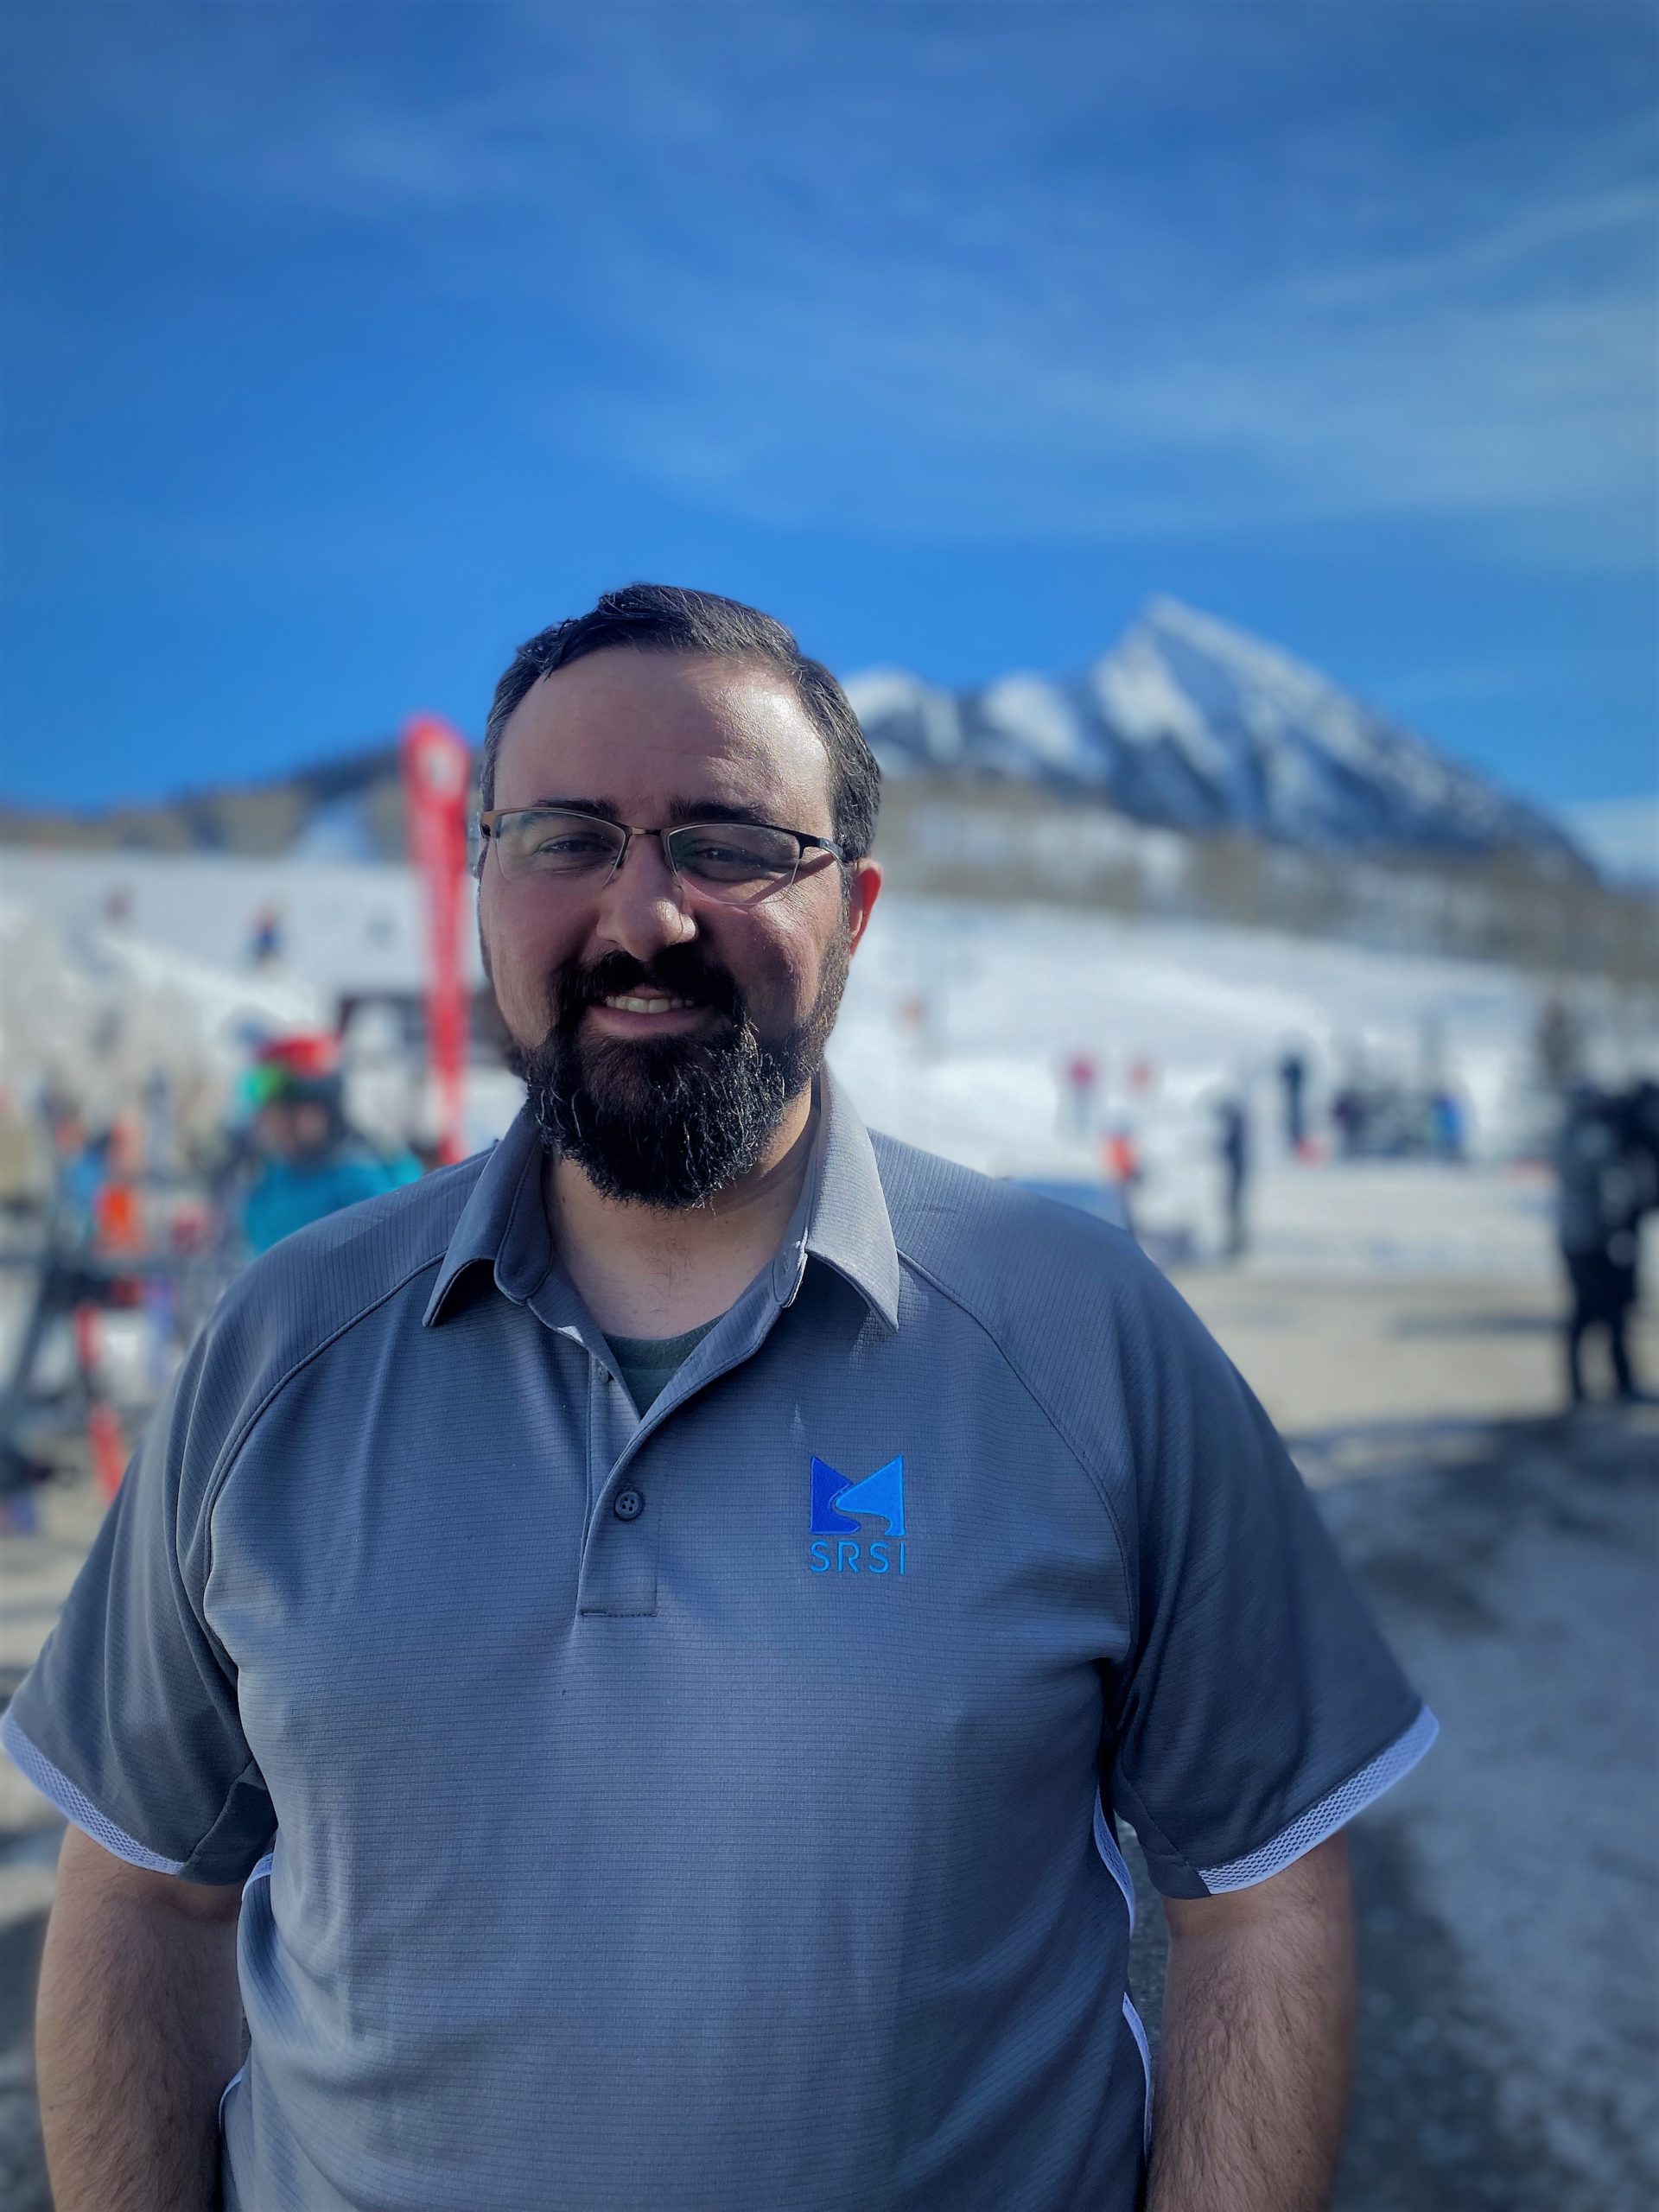 SRSI Welcomes Mark Wry, Systems Solution Manager